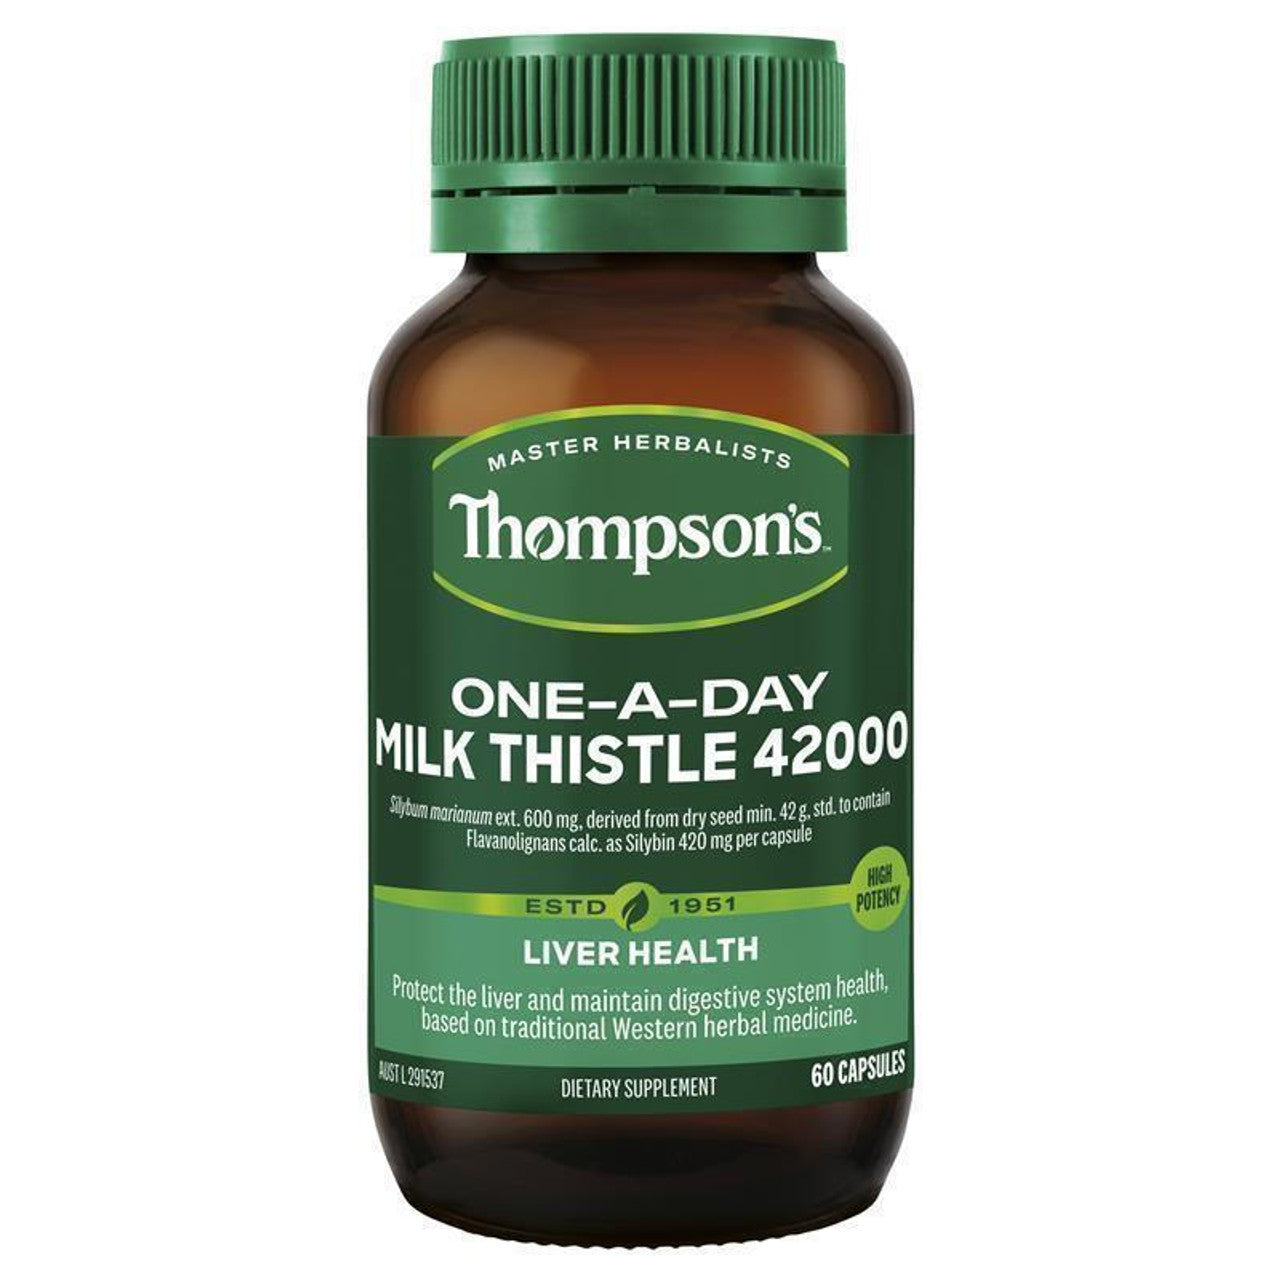 Thompsons One-a-day Milk Thistle 42000mg 60 Caps